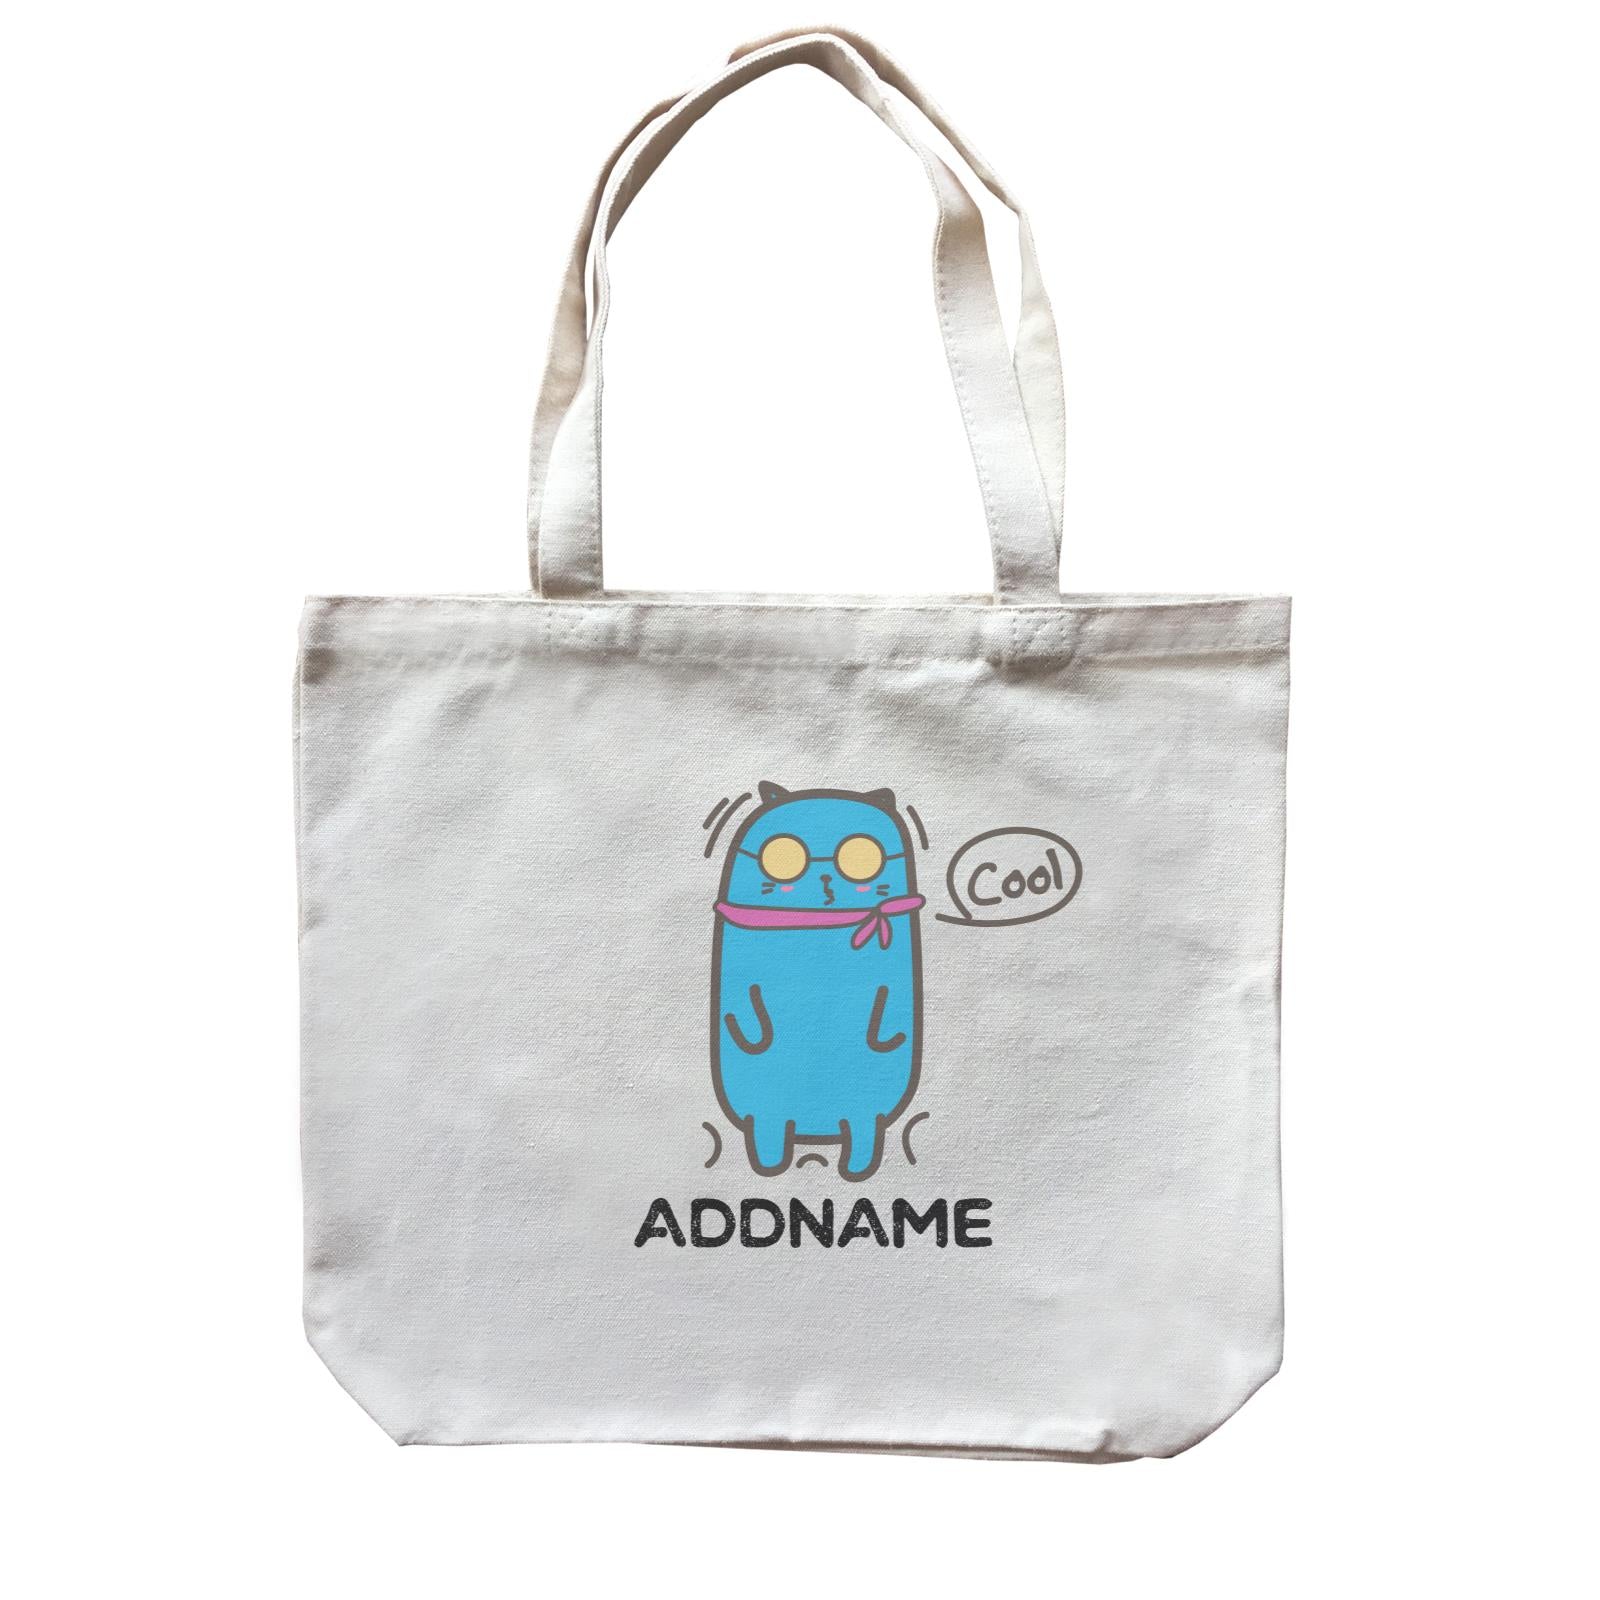 Cute Animals And Friends Series Cool Blue Cat With Sunglasses Addname Canvas Bag